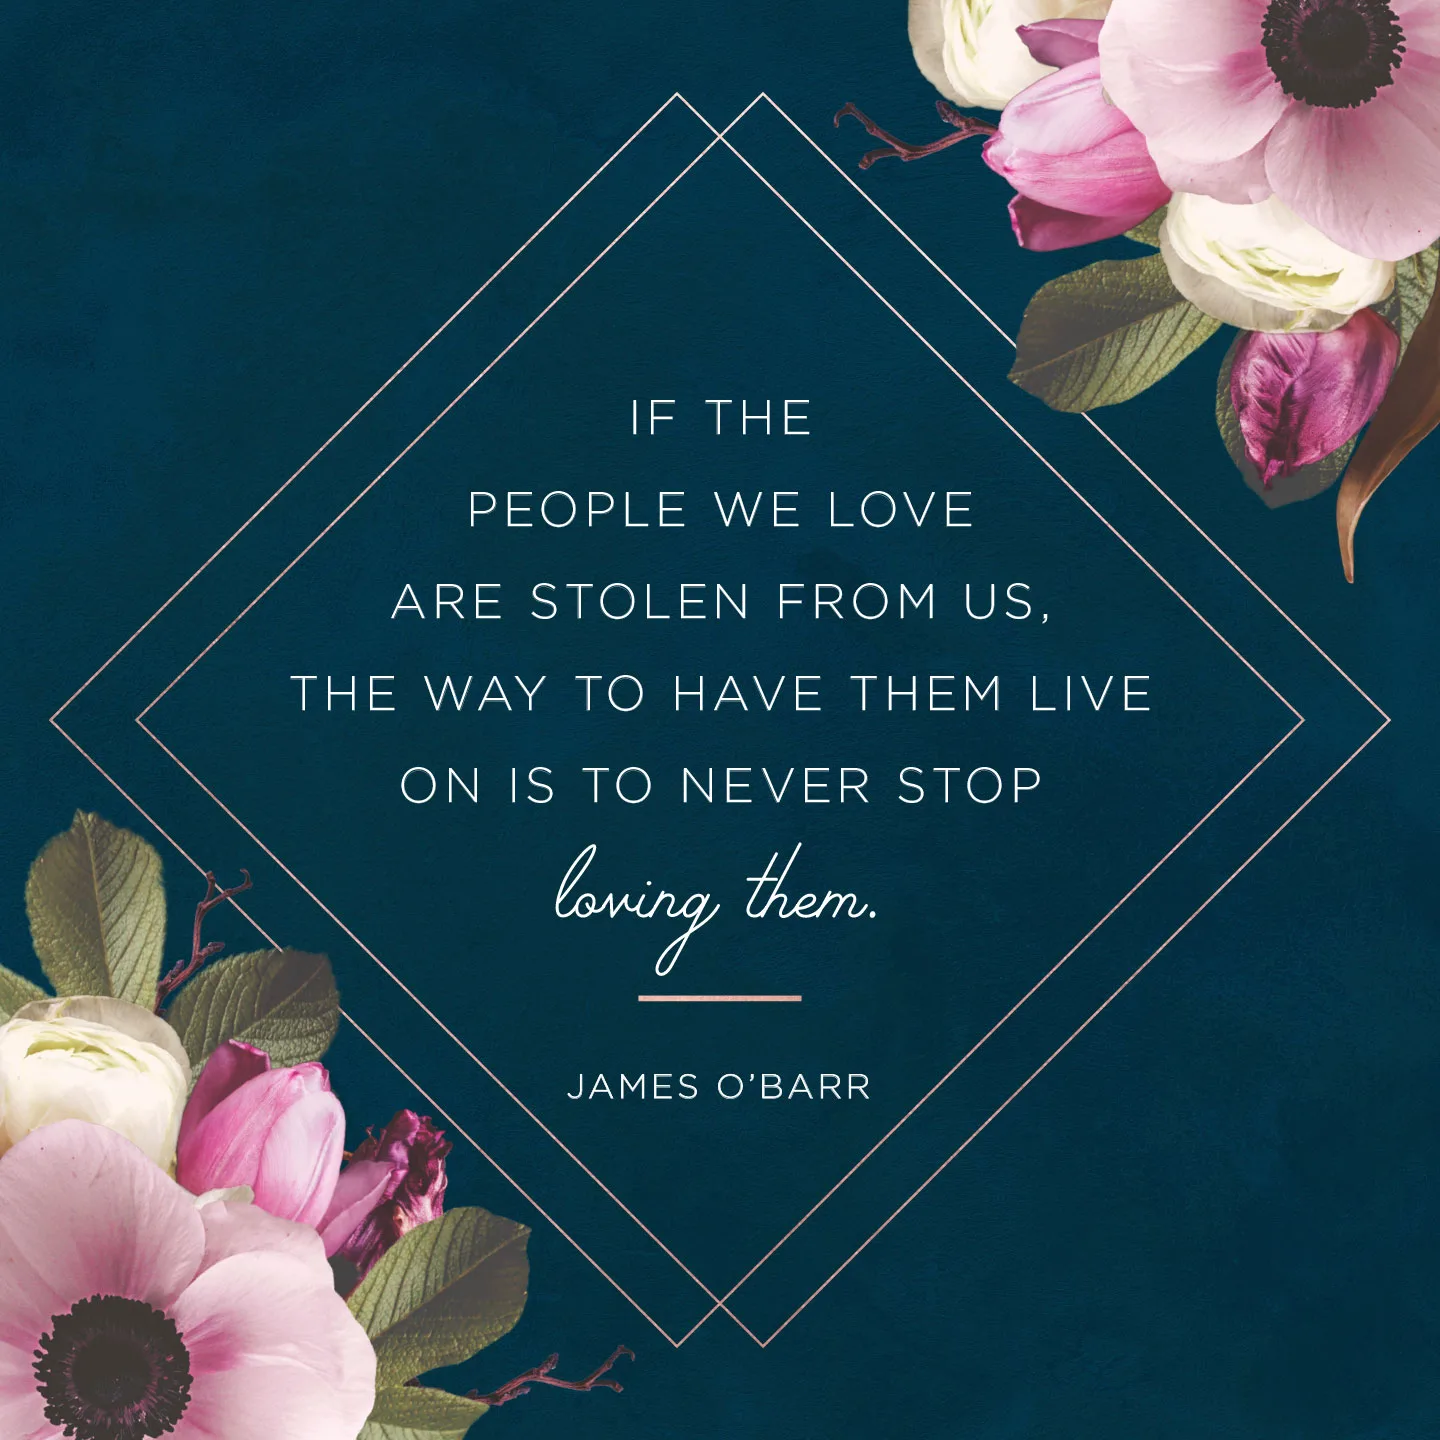 If the people we love are stolen from us, the way to have them live on is to never stop loving them. Quote by James O'Barr.